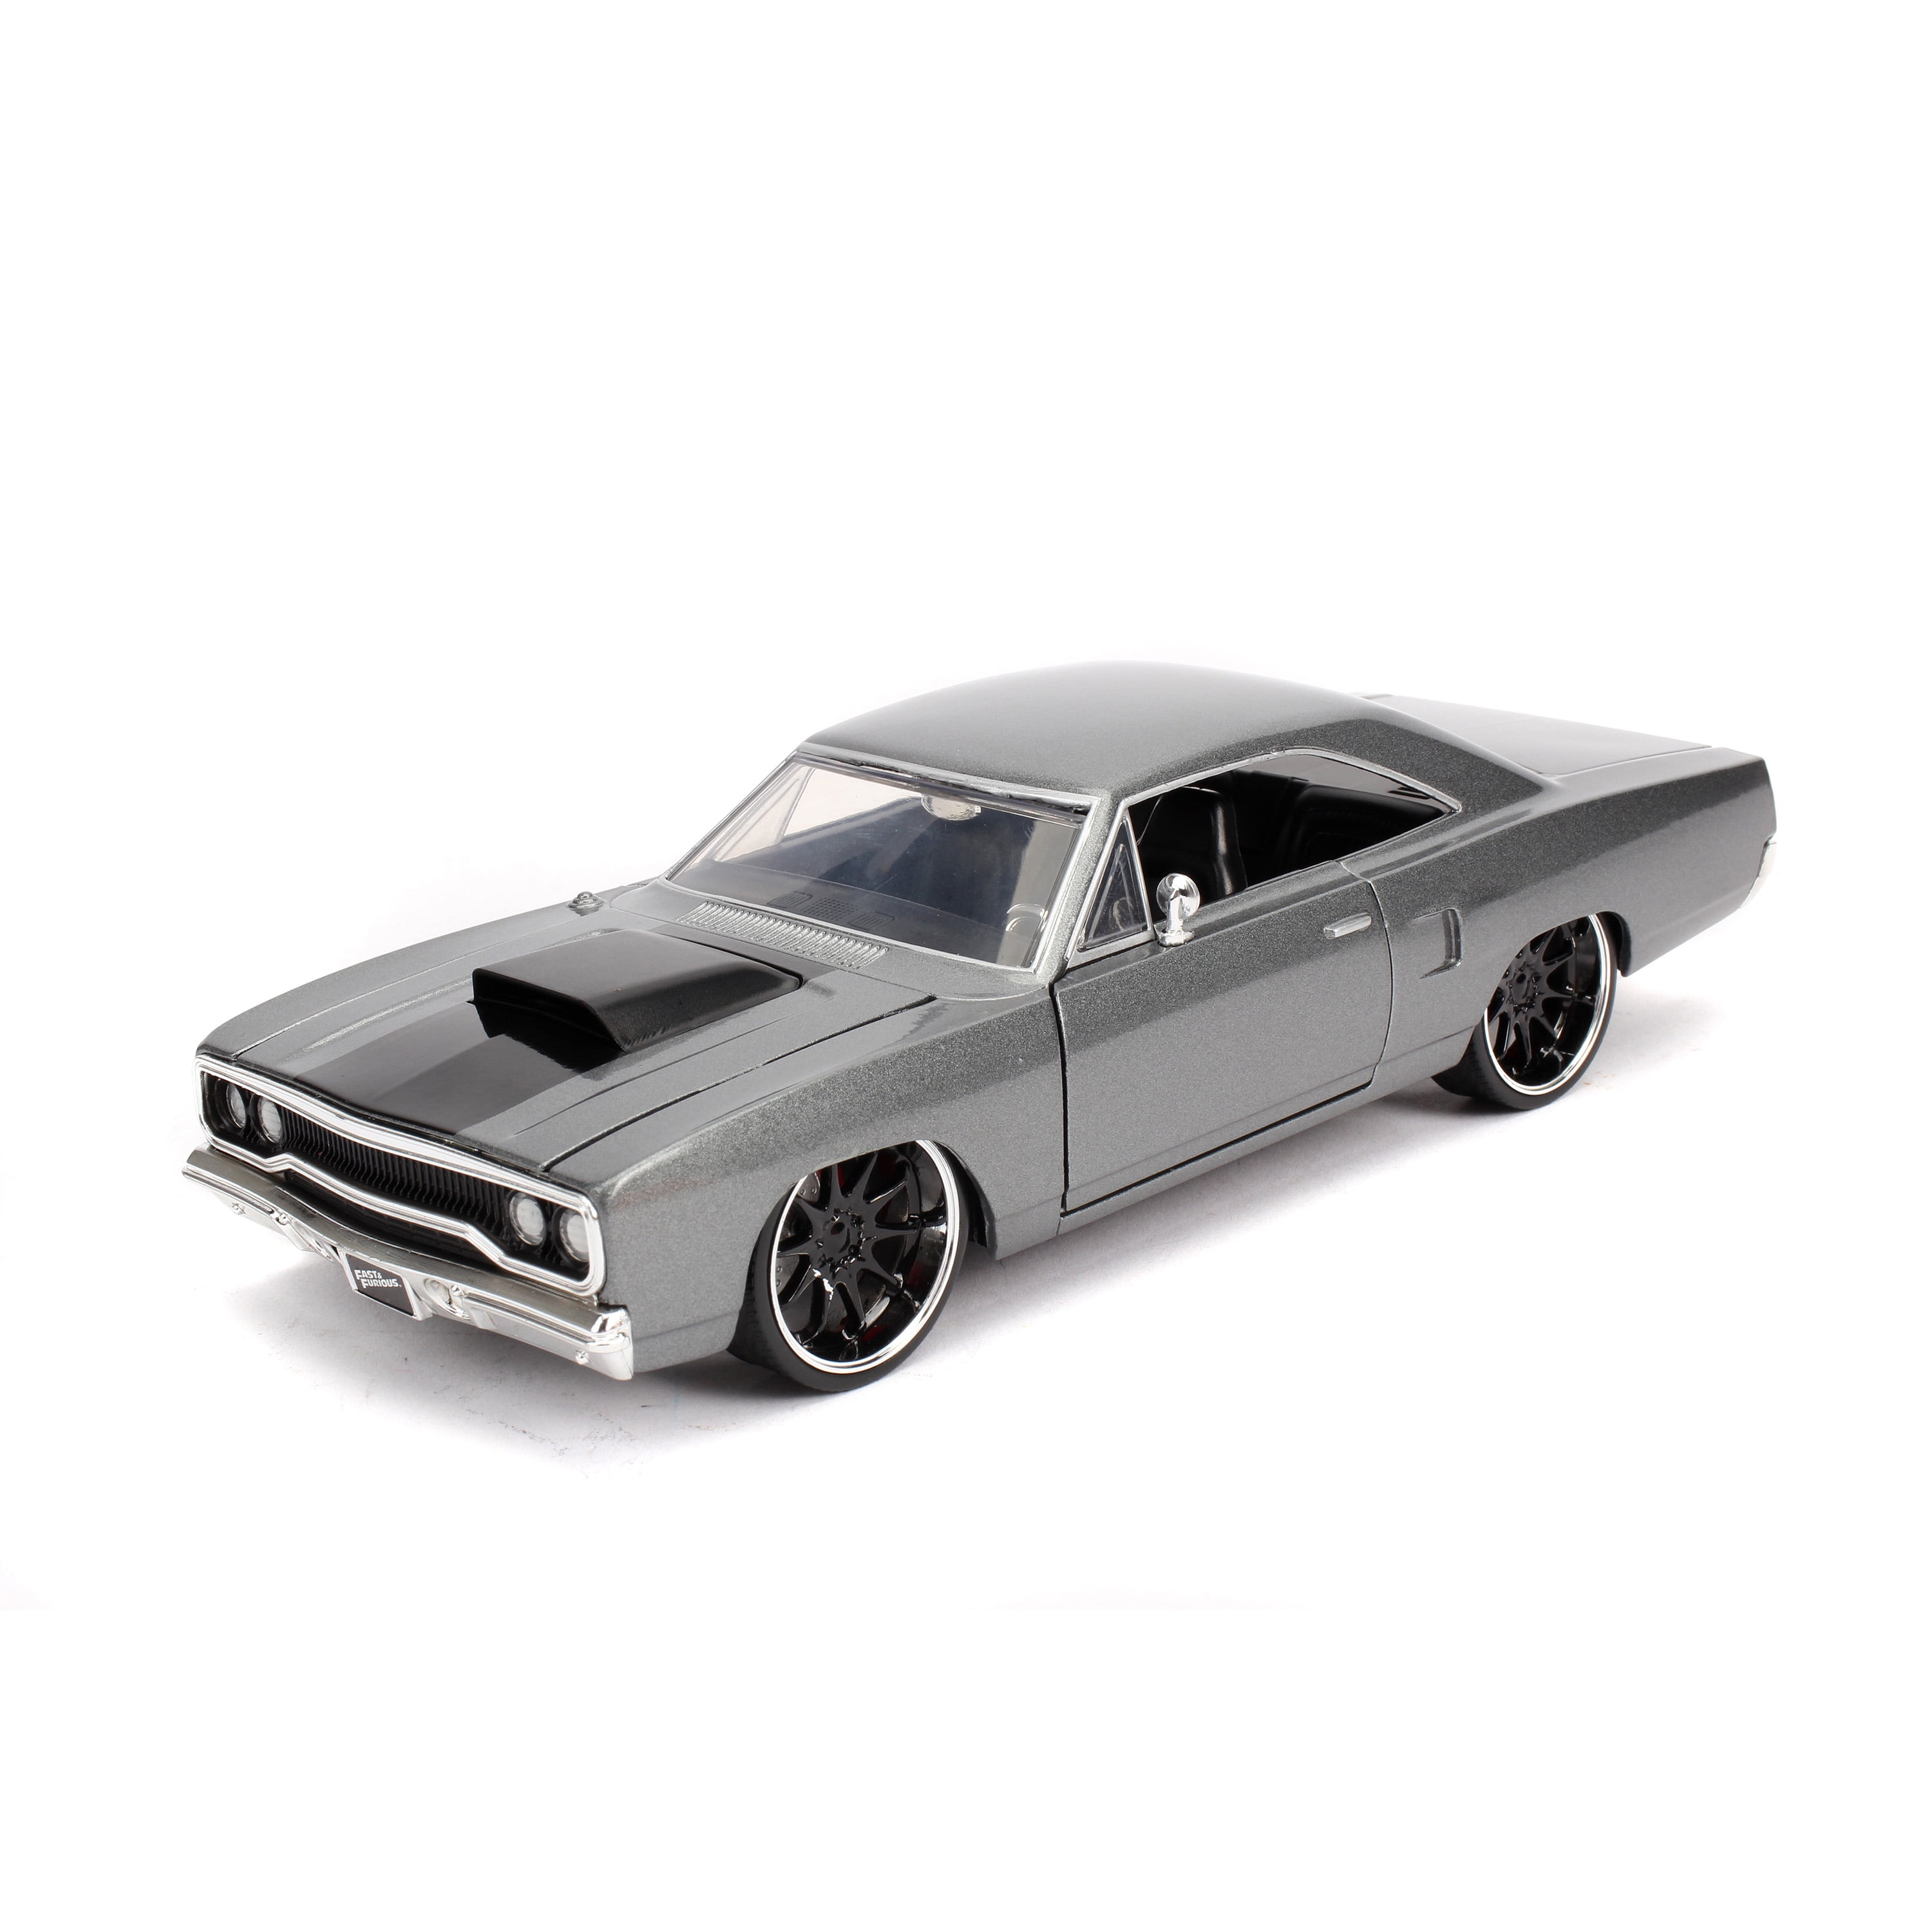 Jada Toys Fast & Furious 8 Diecast Dom's Plymouth GTX Vehicle 1:24 Scale 